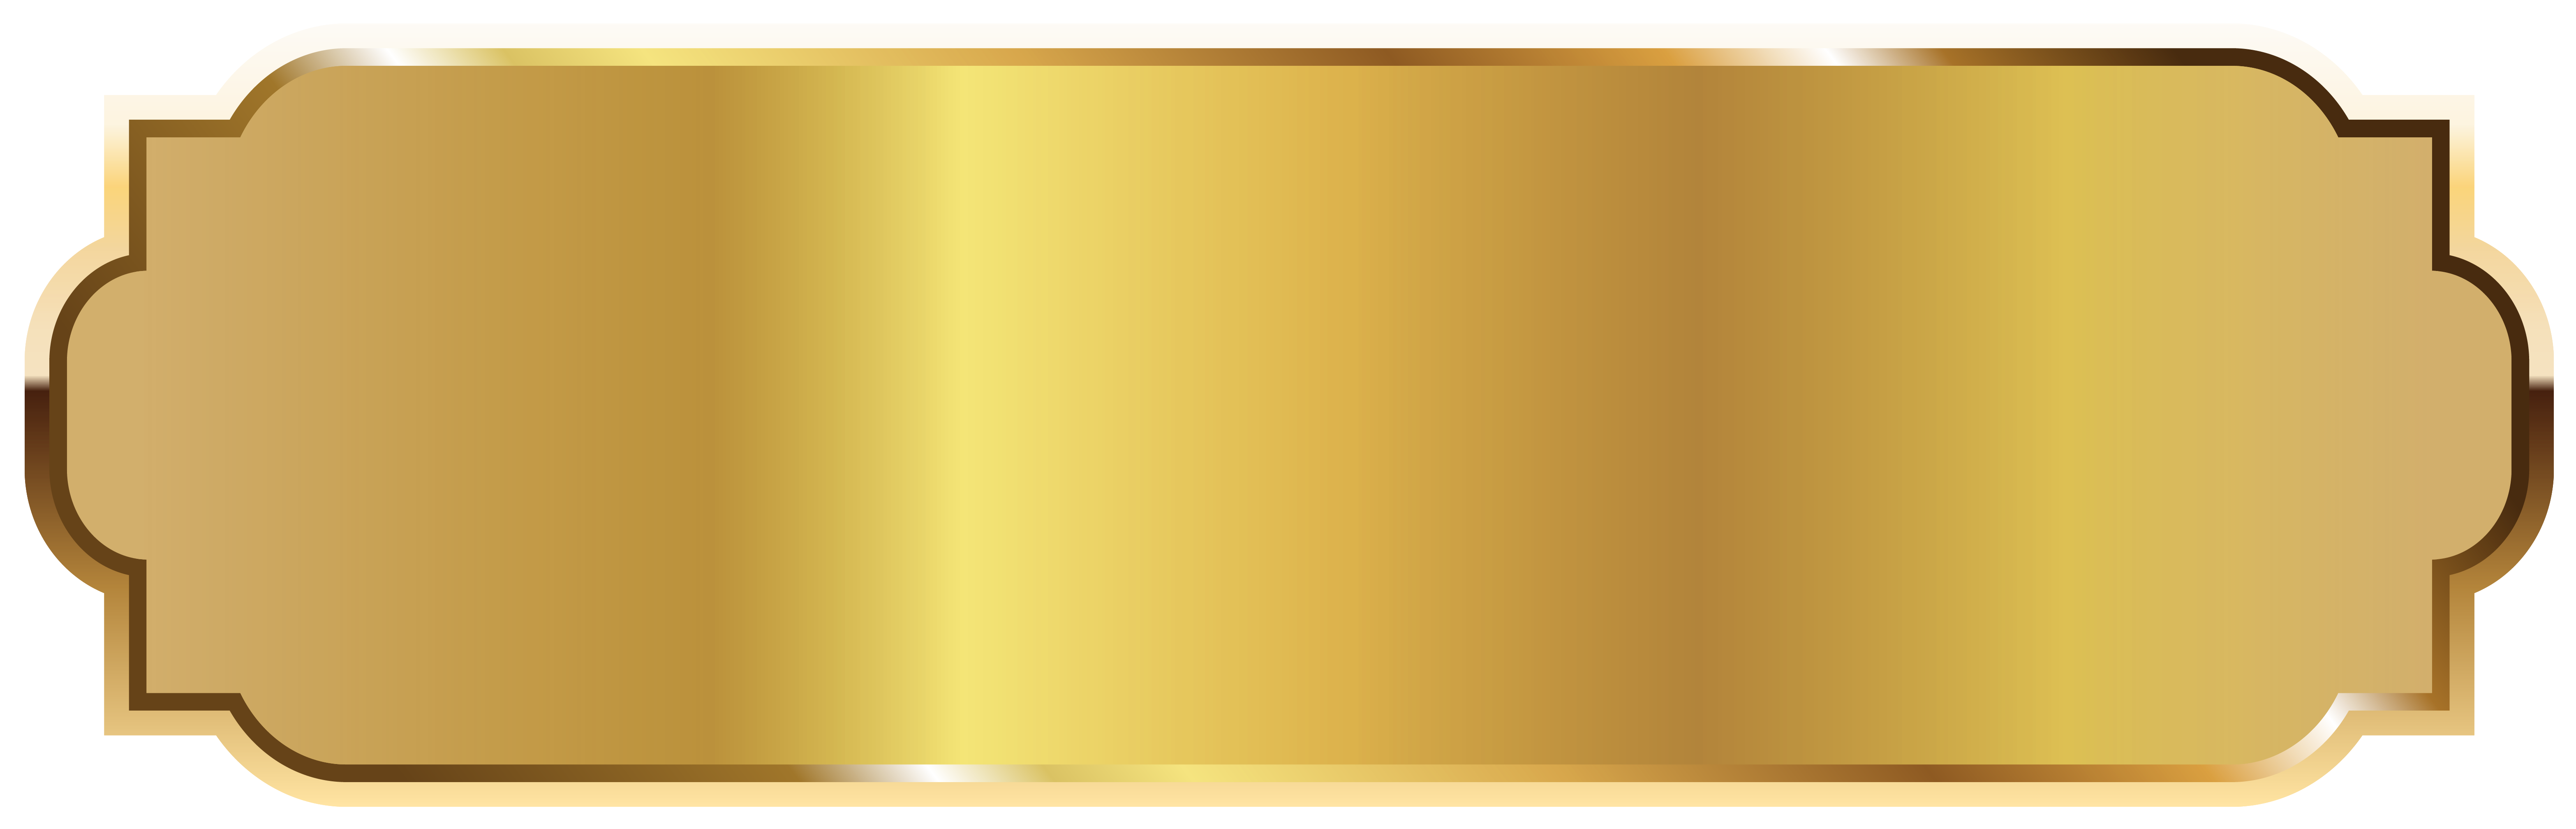 gold-name-plate-png-clip-art-library